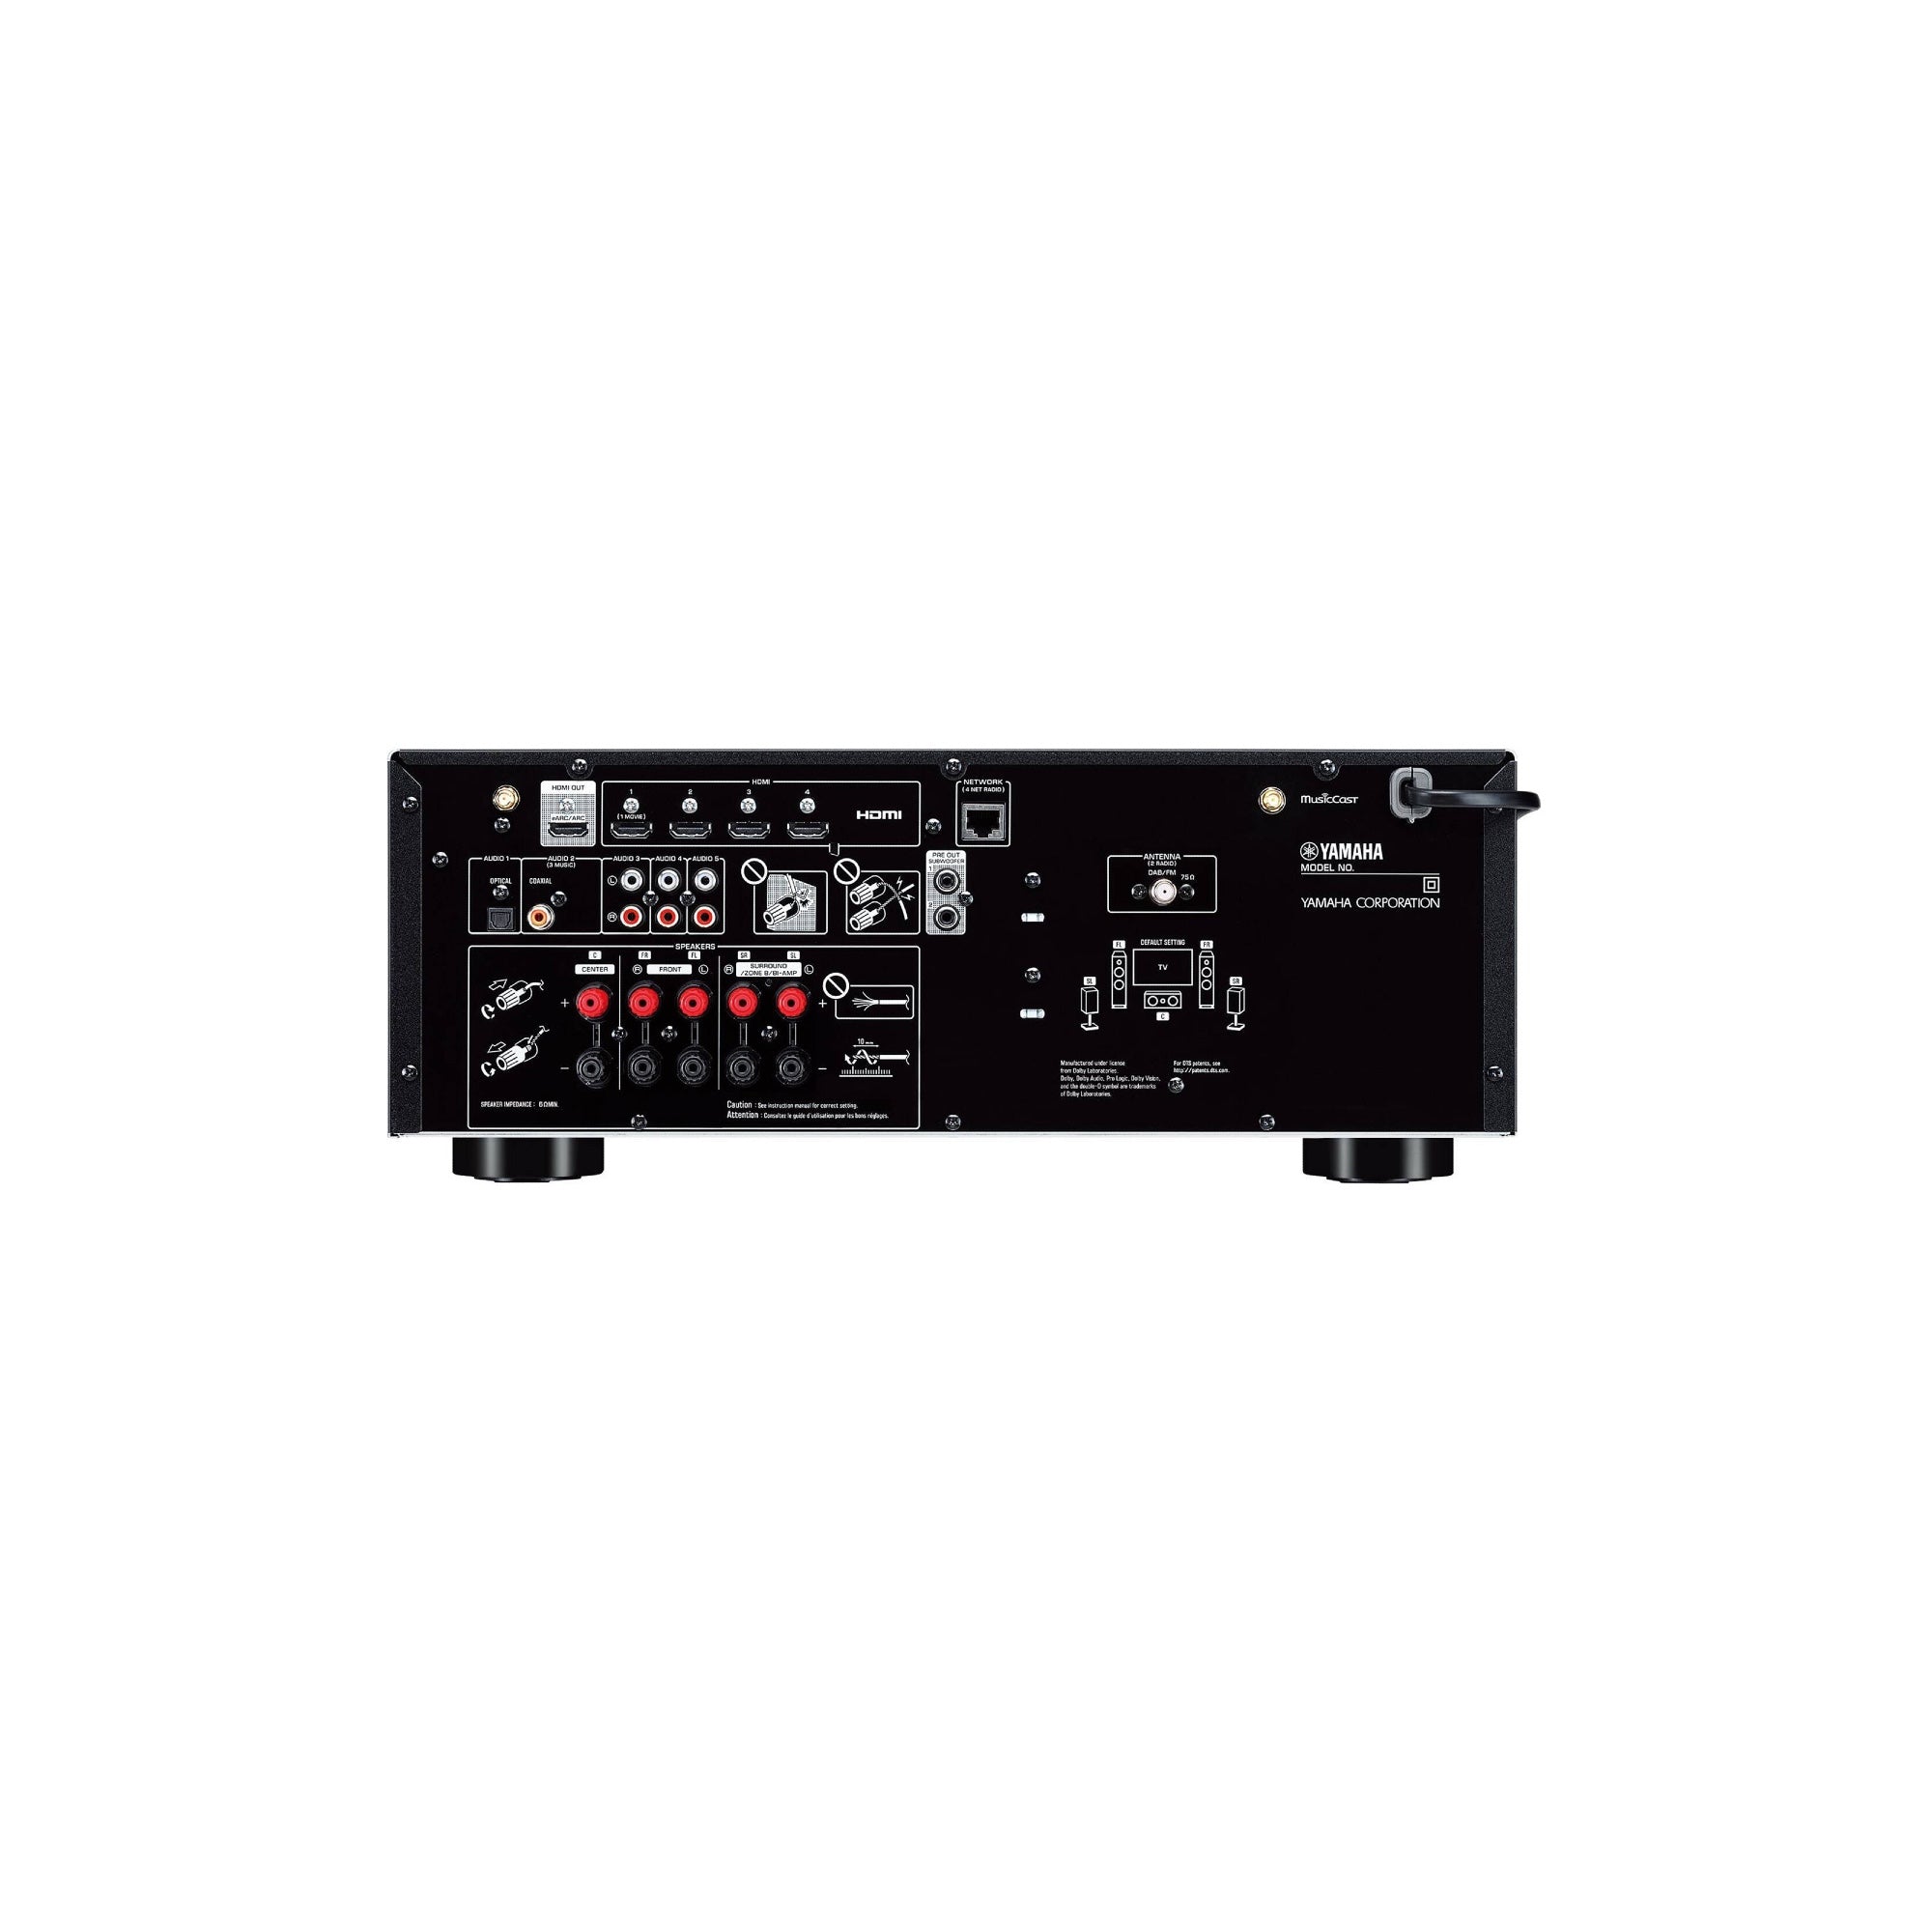 amaha RX-V4A 5.2-Channel Network A/V Receiver with MusicCast